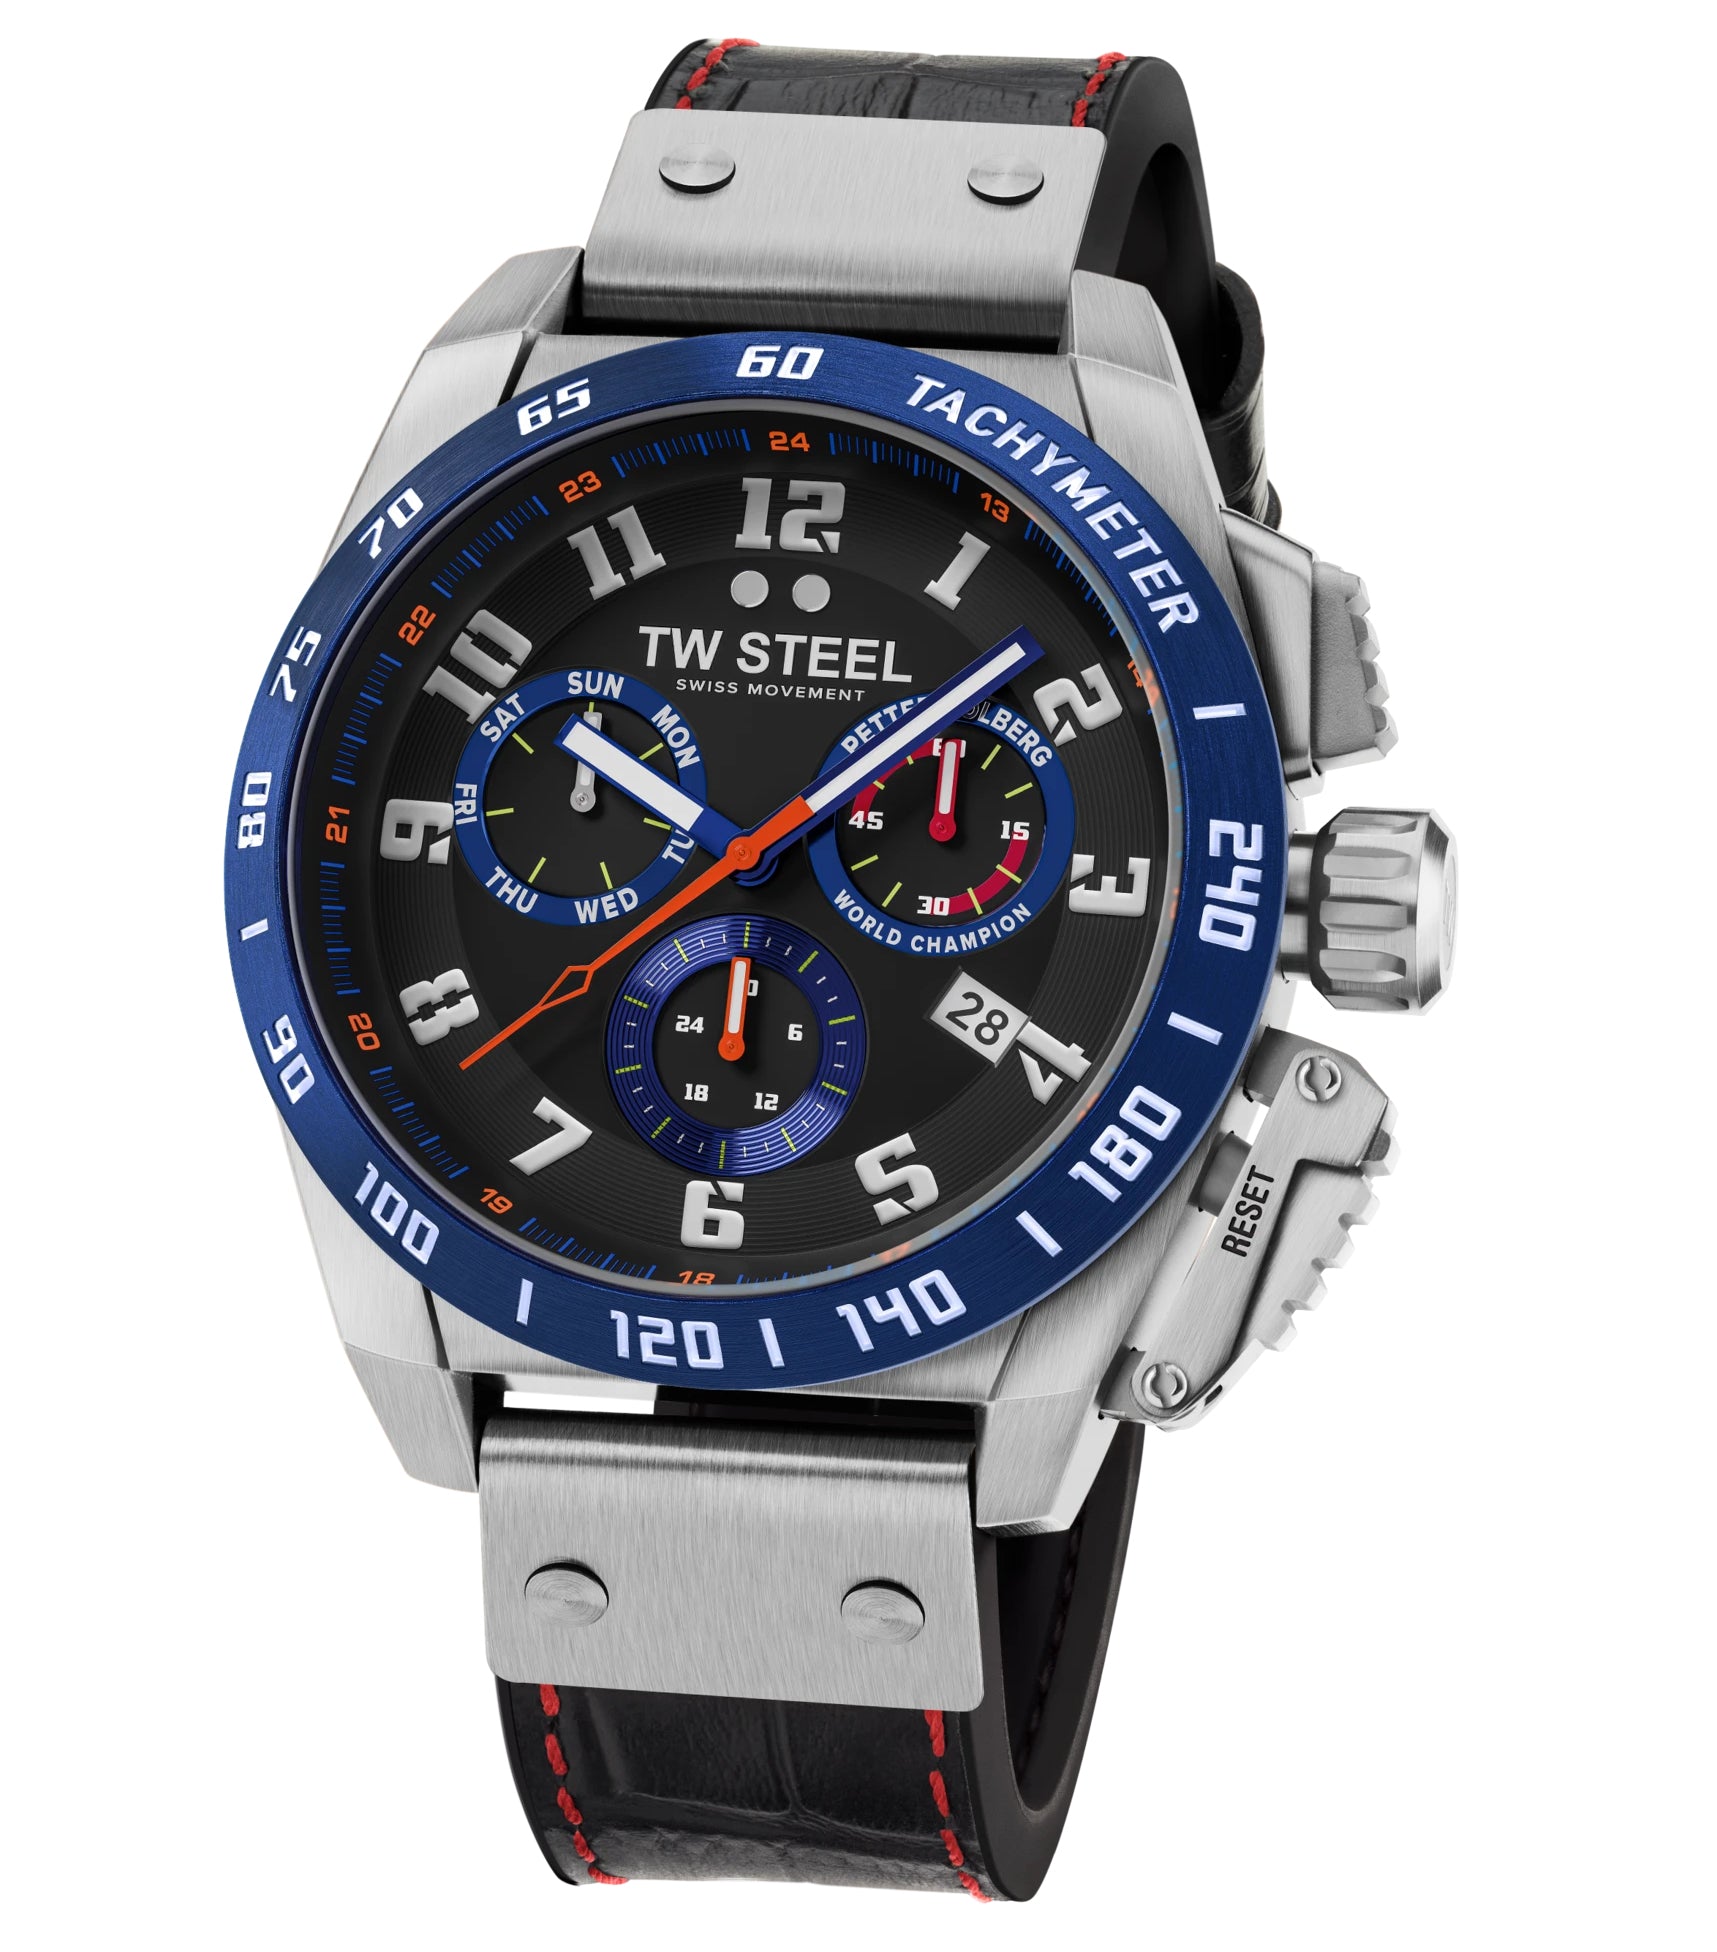 Tw Steel Watch Fast Lane Canteen Petter Solberg Limited Edition